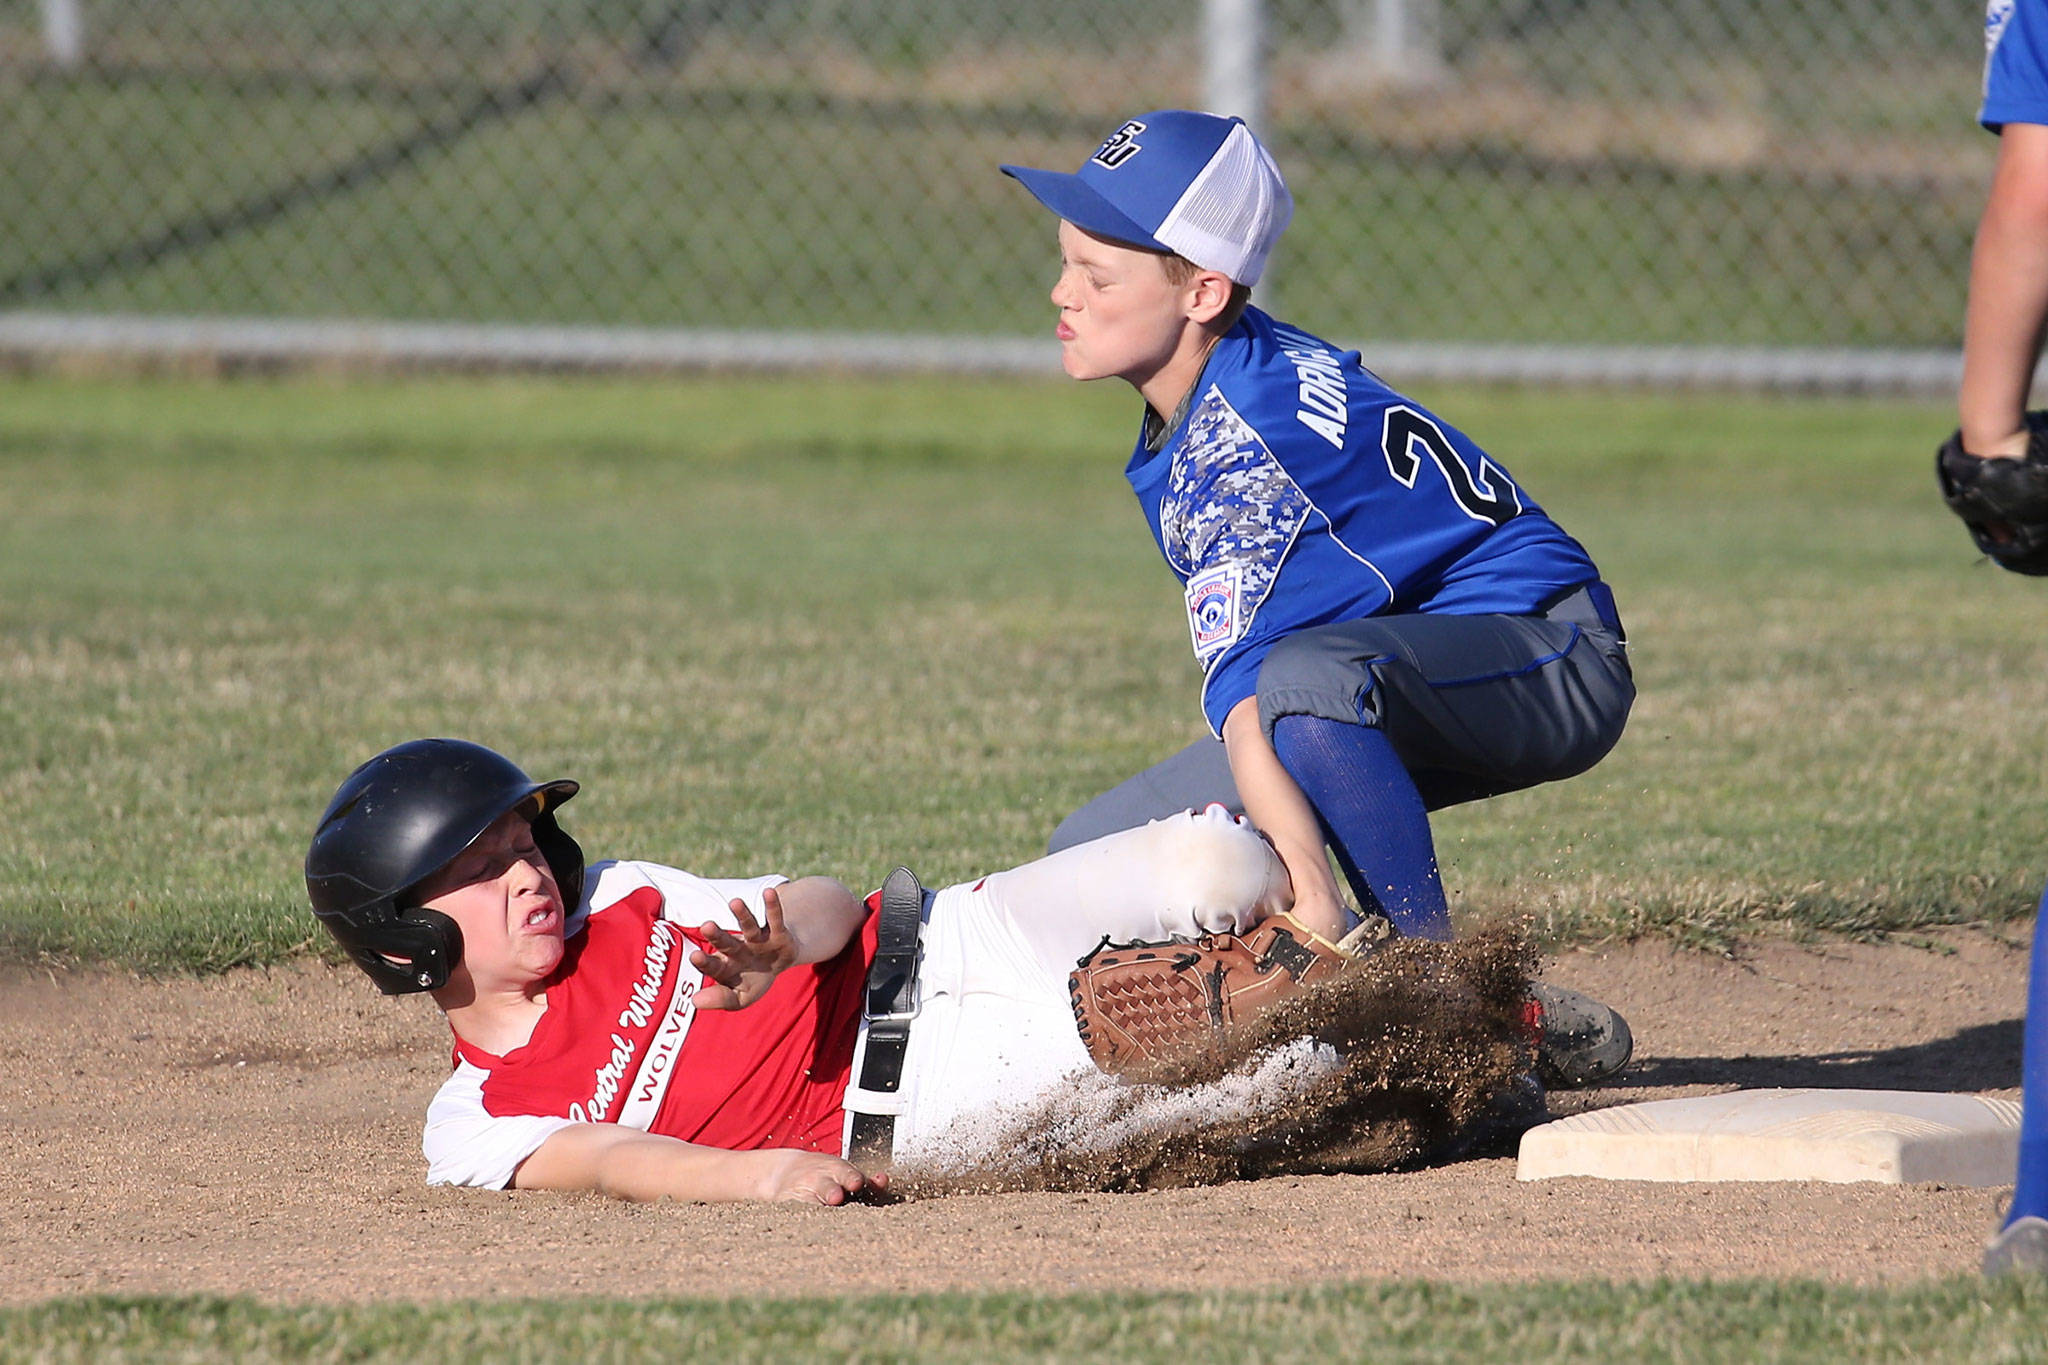 South Whidbey shortstop Jaden Adragna tags out Central Whidbey’s Chase Anderson trying to steal second base. (Photo by John Fisken)